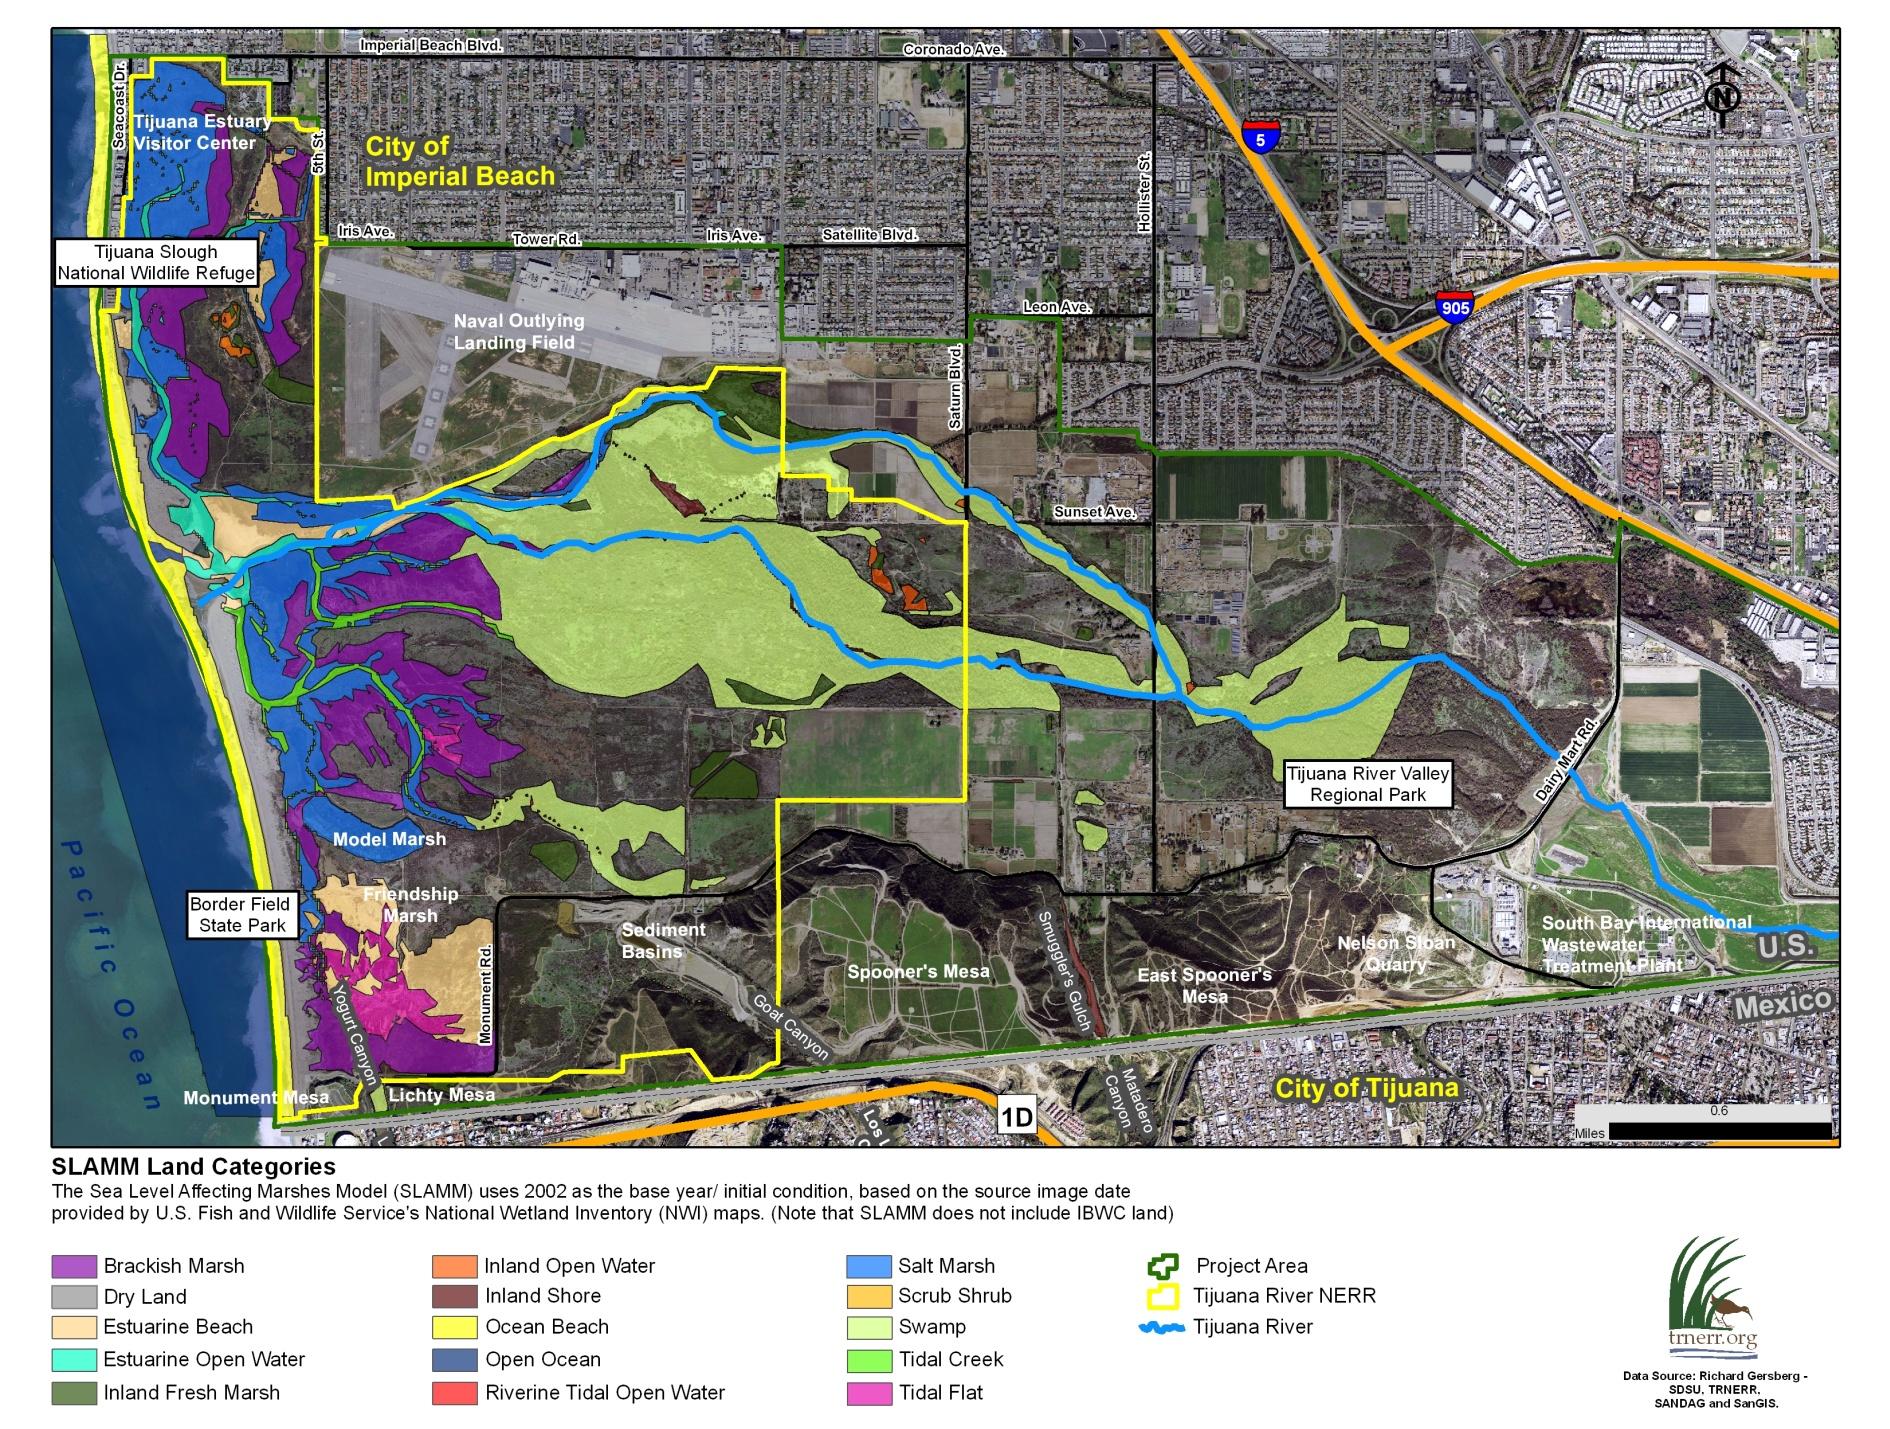 Figure 4: Habitat Map Habitat map for the valley used for the Sea Level Affecting Marshes Model (SLAMM) run for San Diego County by Dr. Richard Gersberg at San Diego State University.